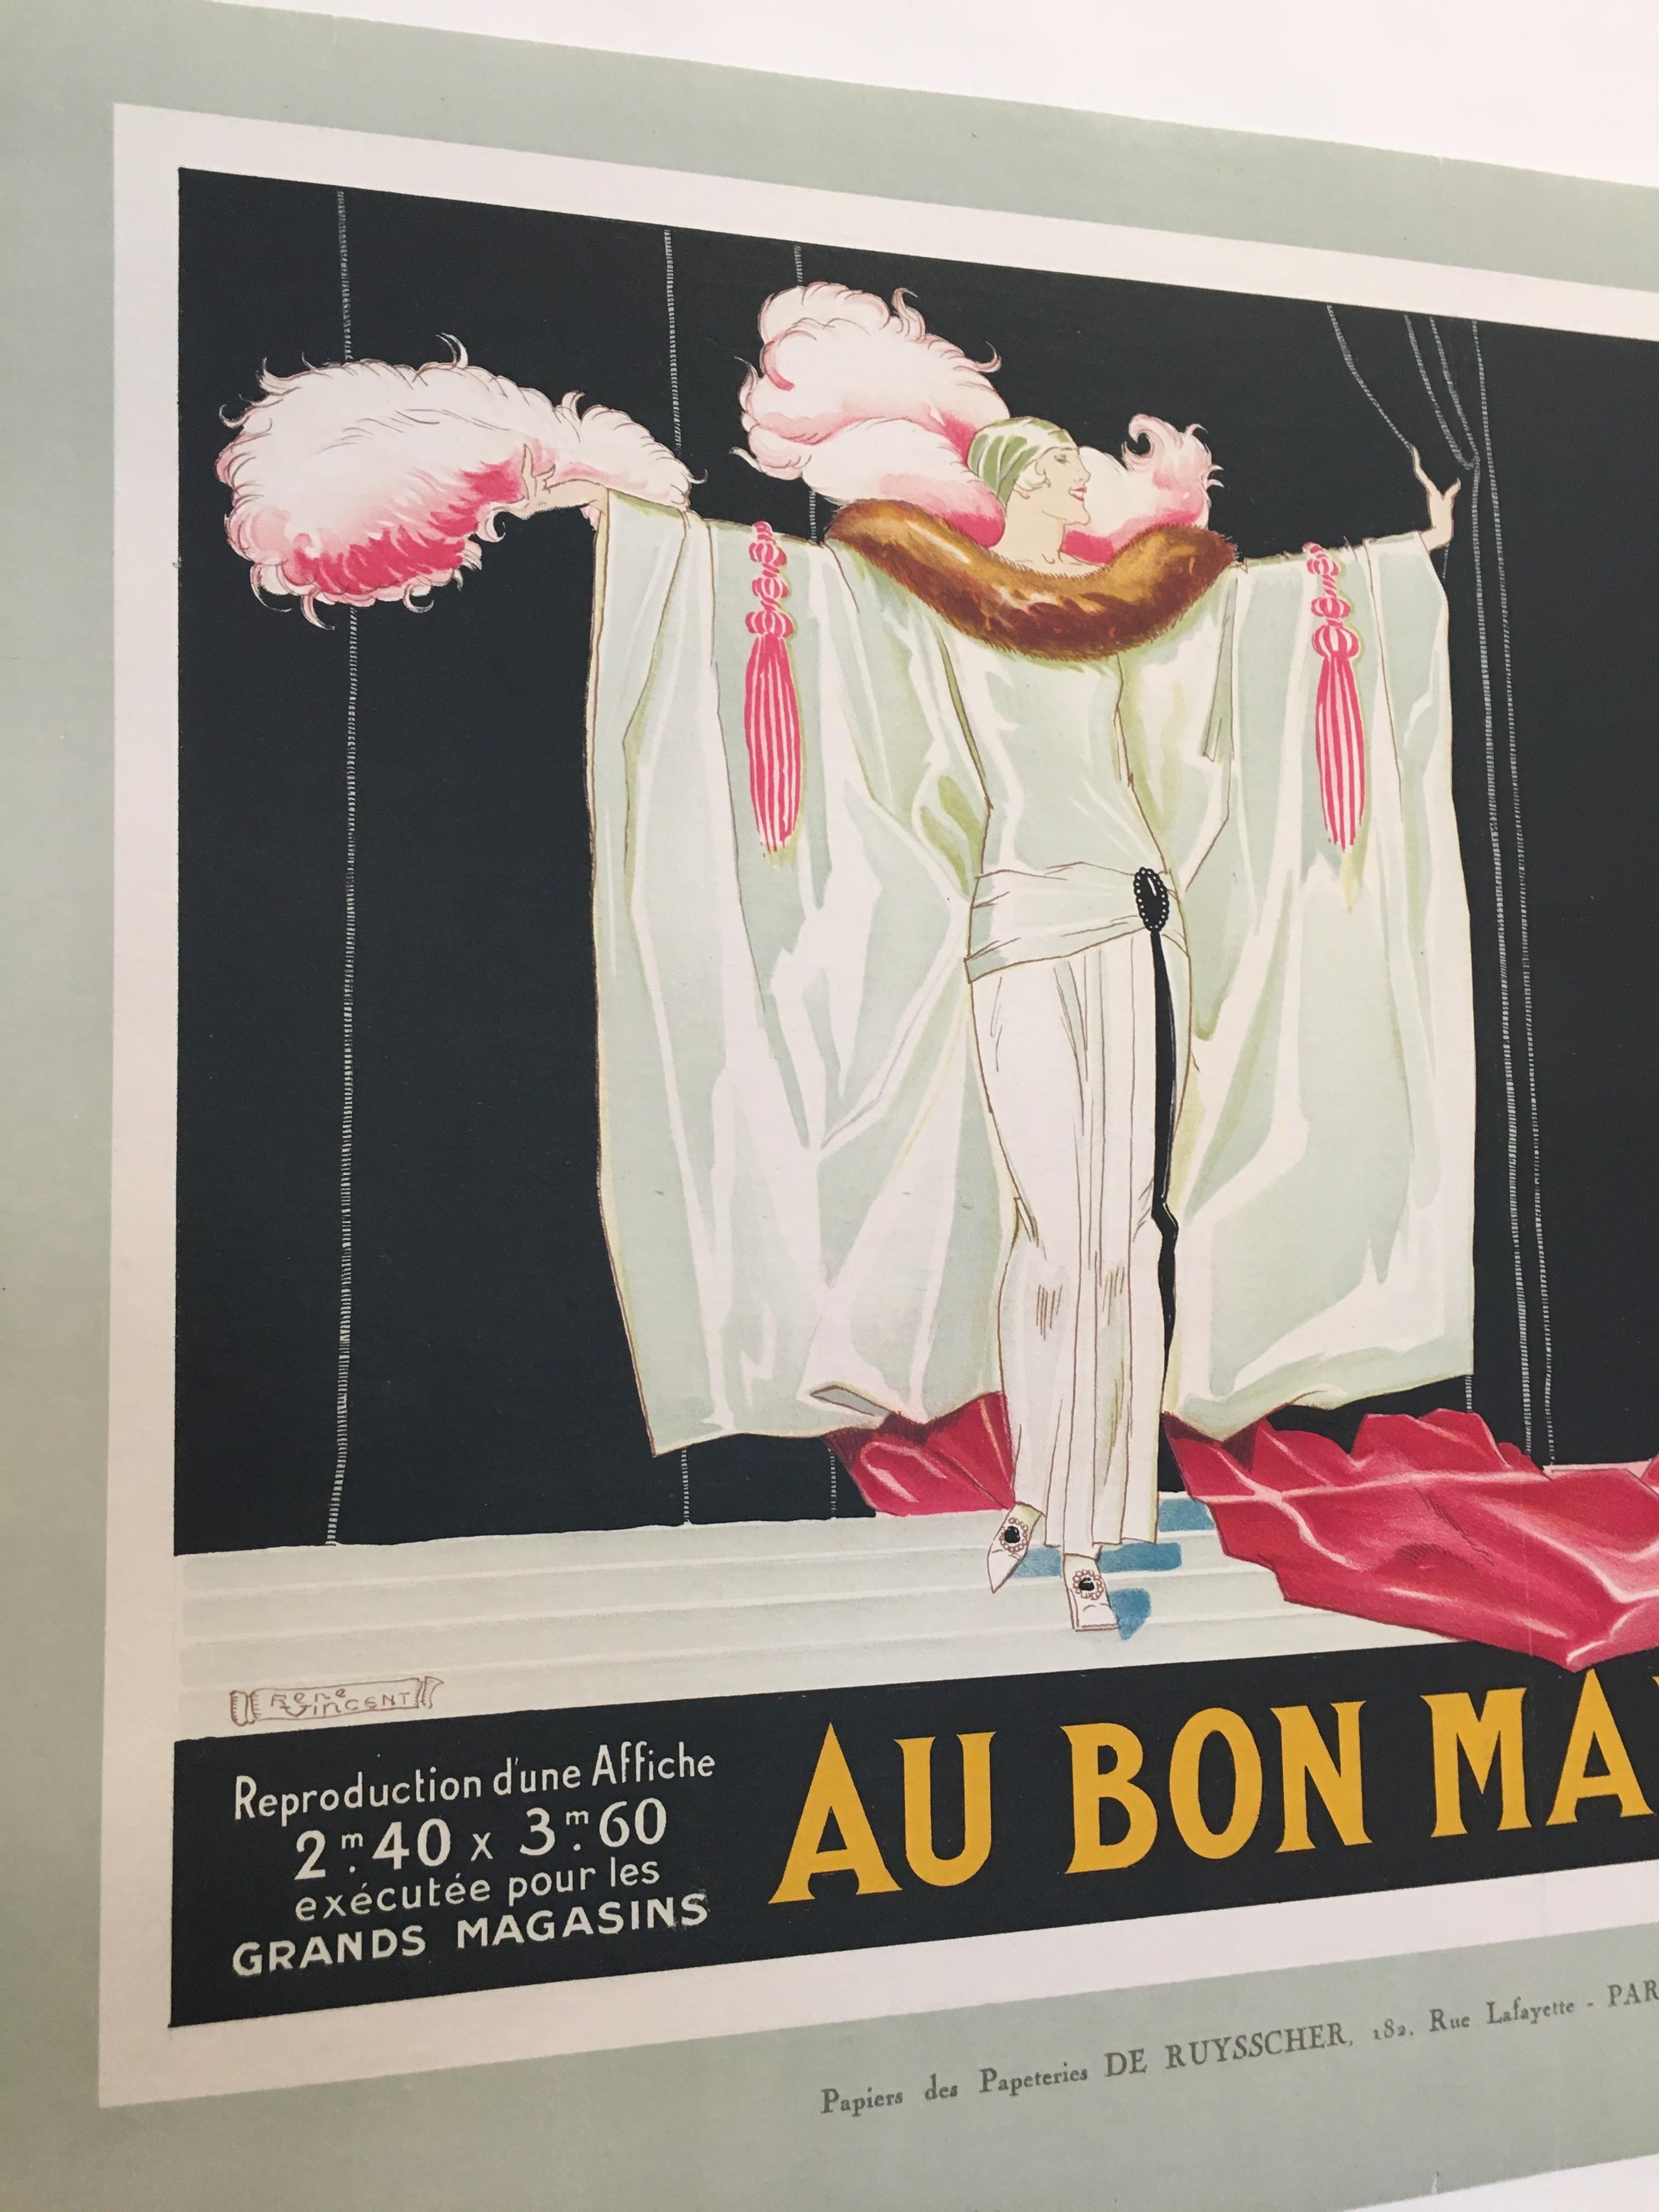 Original vintage French lithograph poster, 'Au Bon Marche' by Rene Vincent, 1920

René Vincent was a French illustrator who was active in the 1920s-1930s. He worked in an Art Deco style and became famous for his poster designs. He was influential